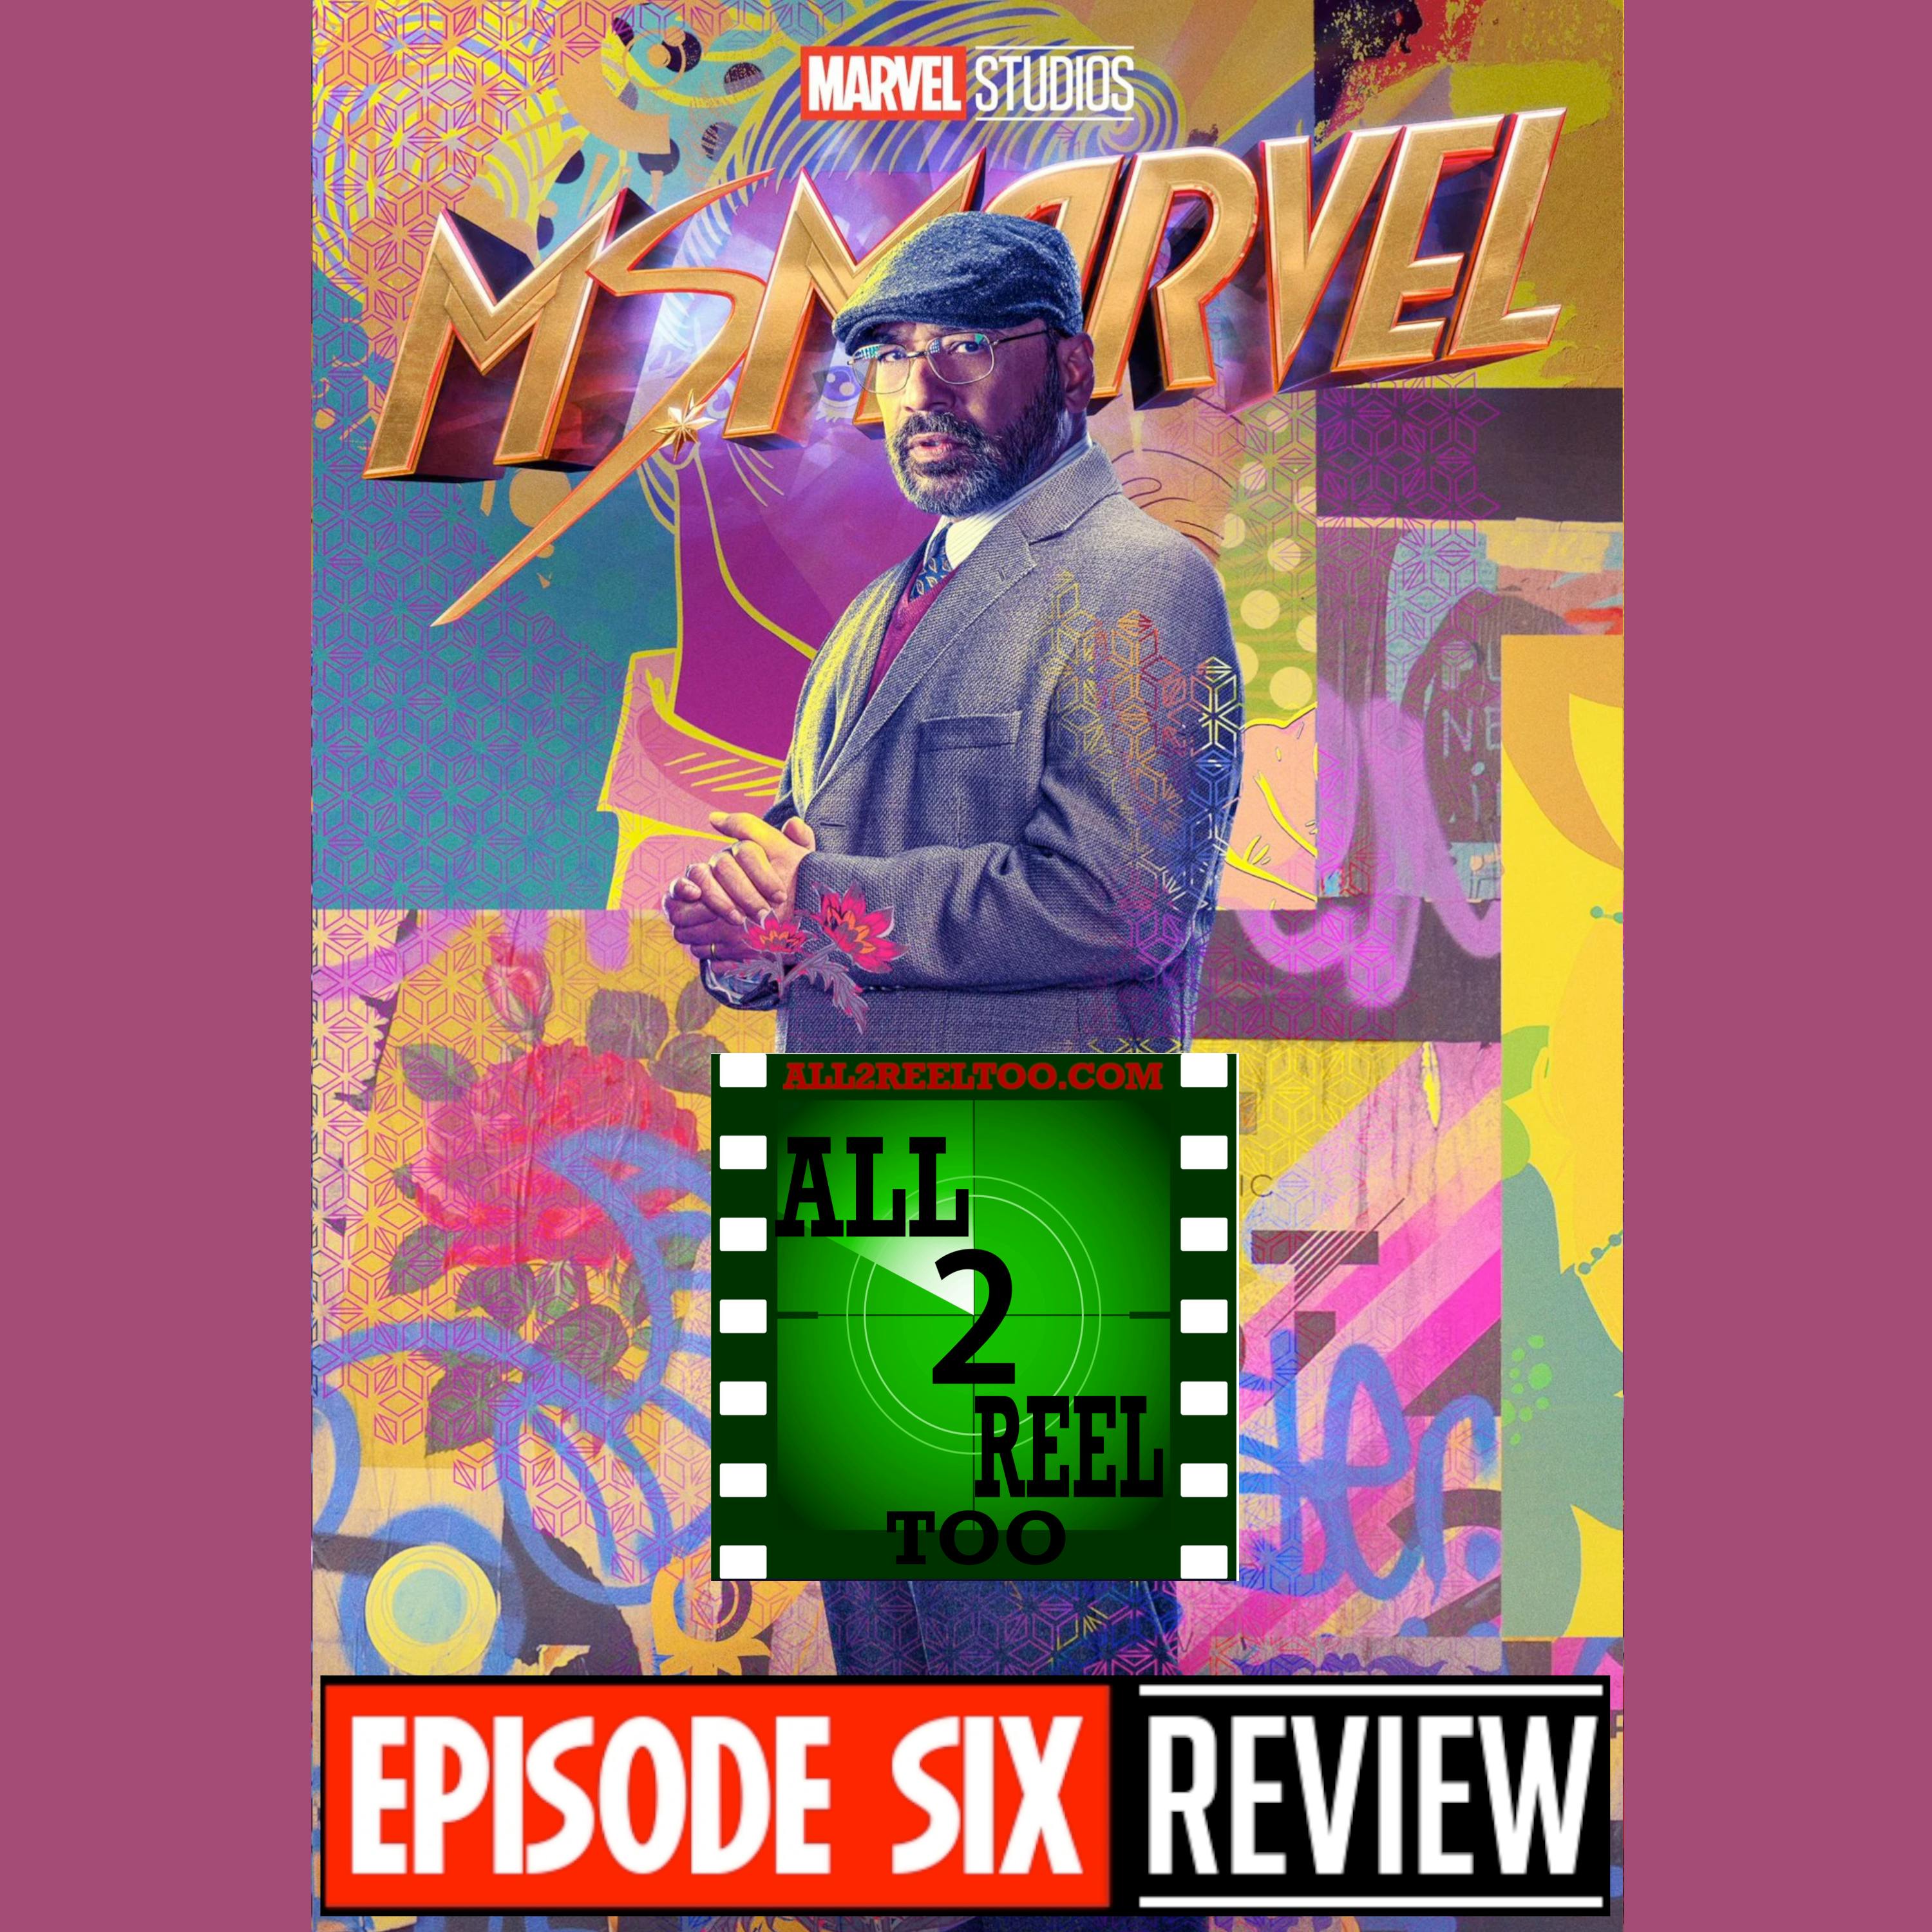 Ms. Marvel EPISODE 6 REVIEW